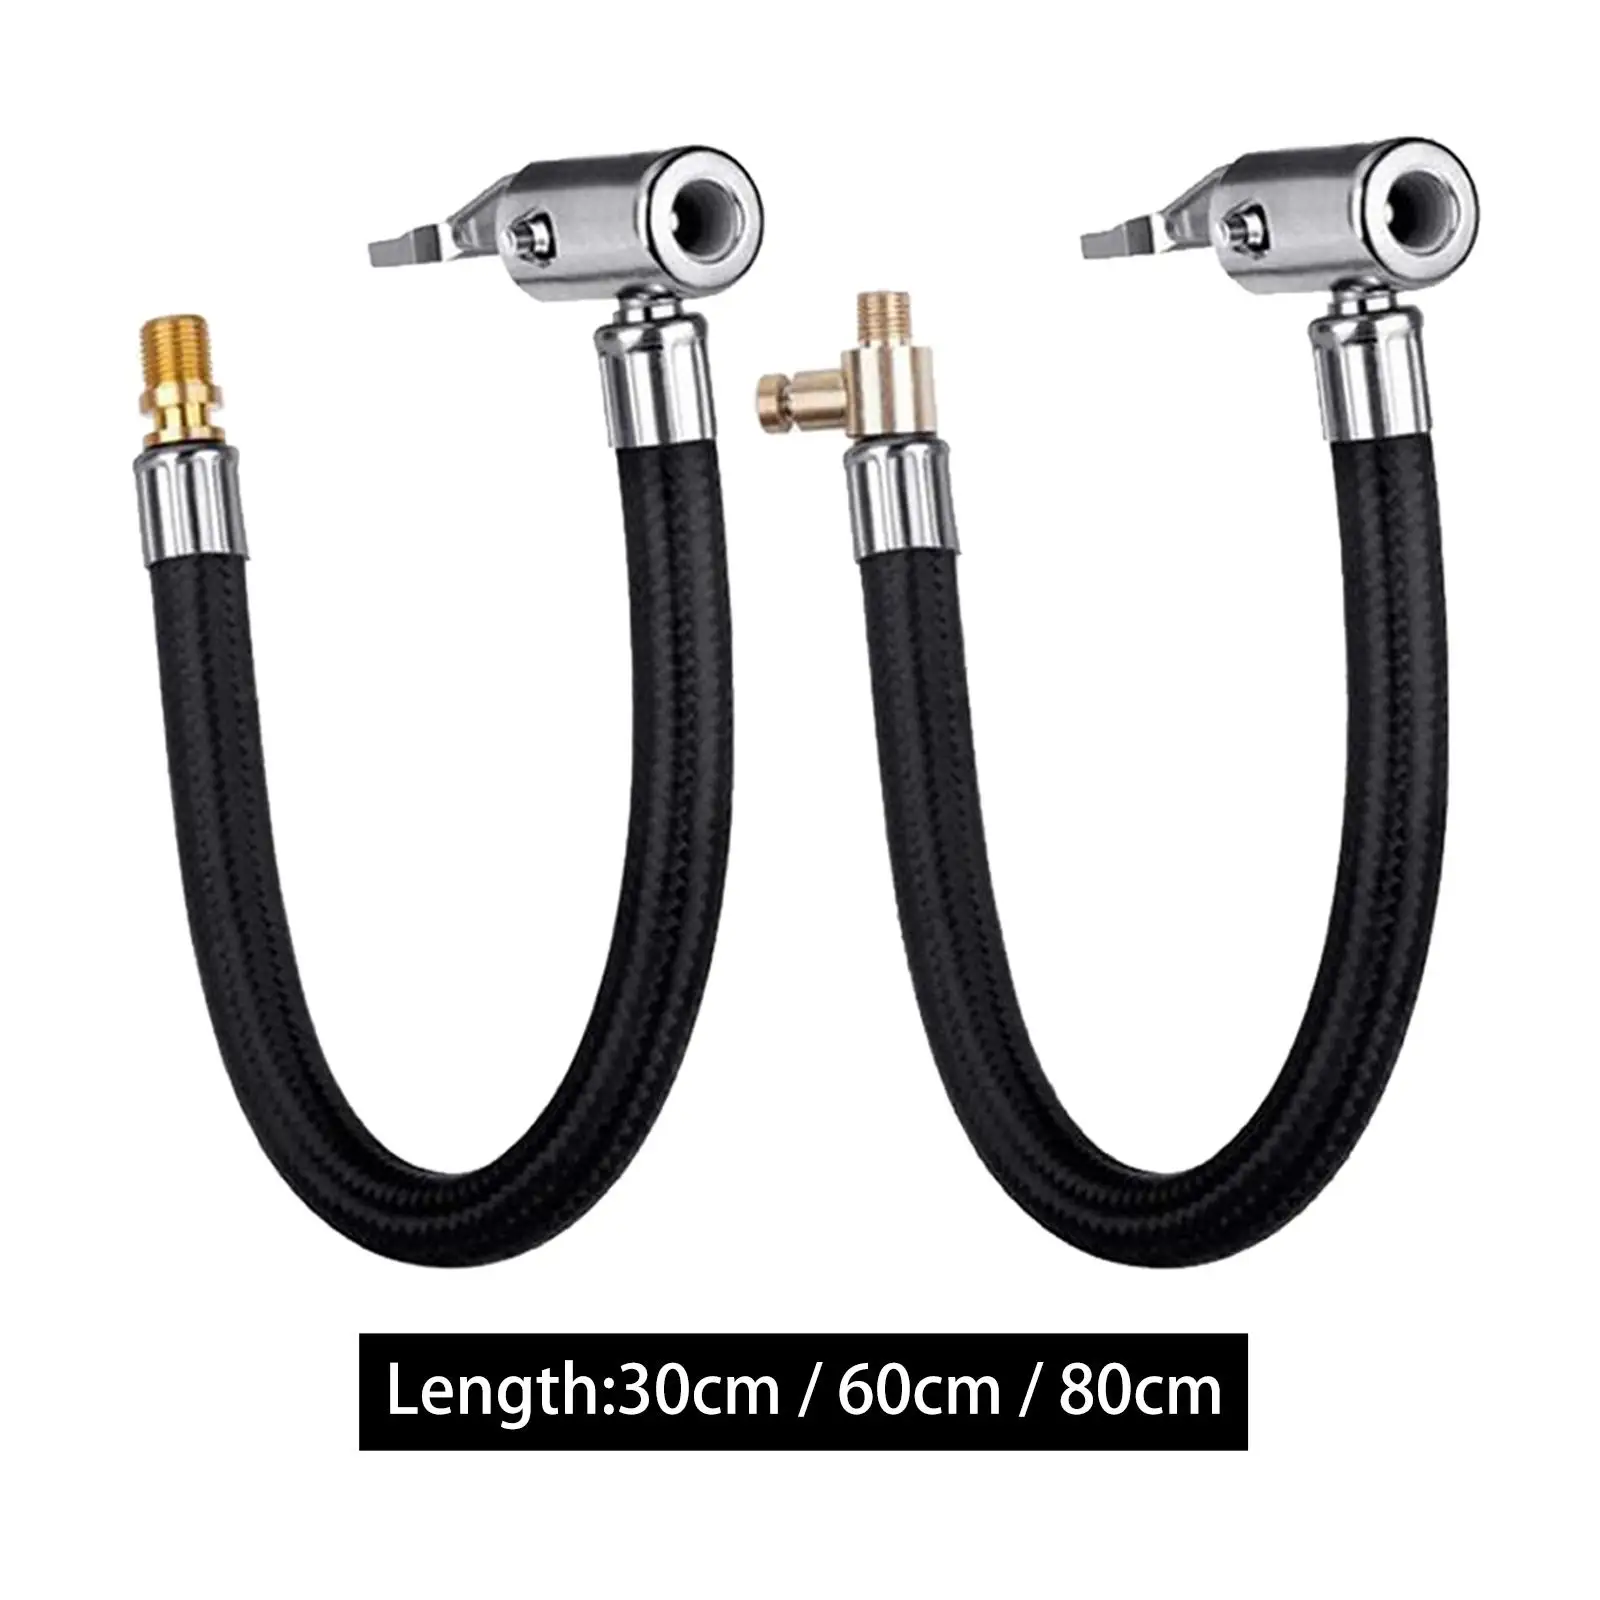 

Automobile Car Tire Air Inflator Hose Inflator Pump Extension Connection Use Under 200PSI